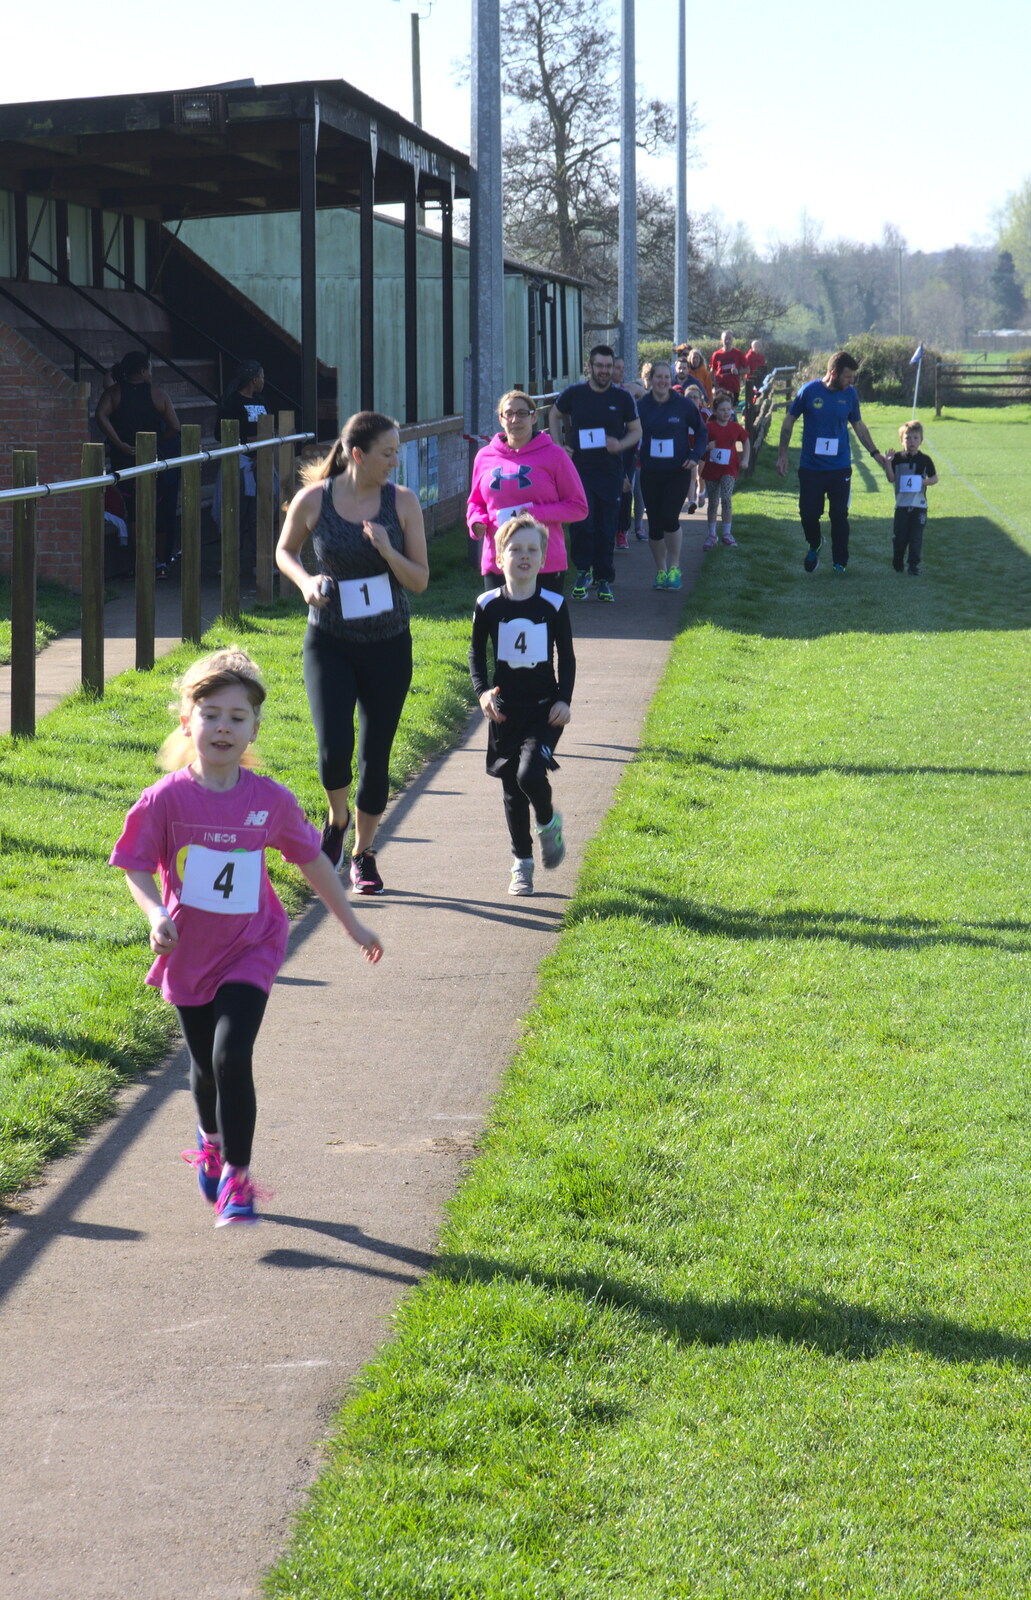 There's a mini children's race from The Black Dog Festival of Running, Bungay, Suffolk - 2nd April 2017